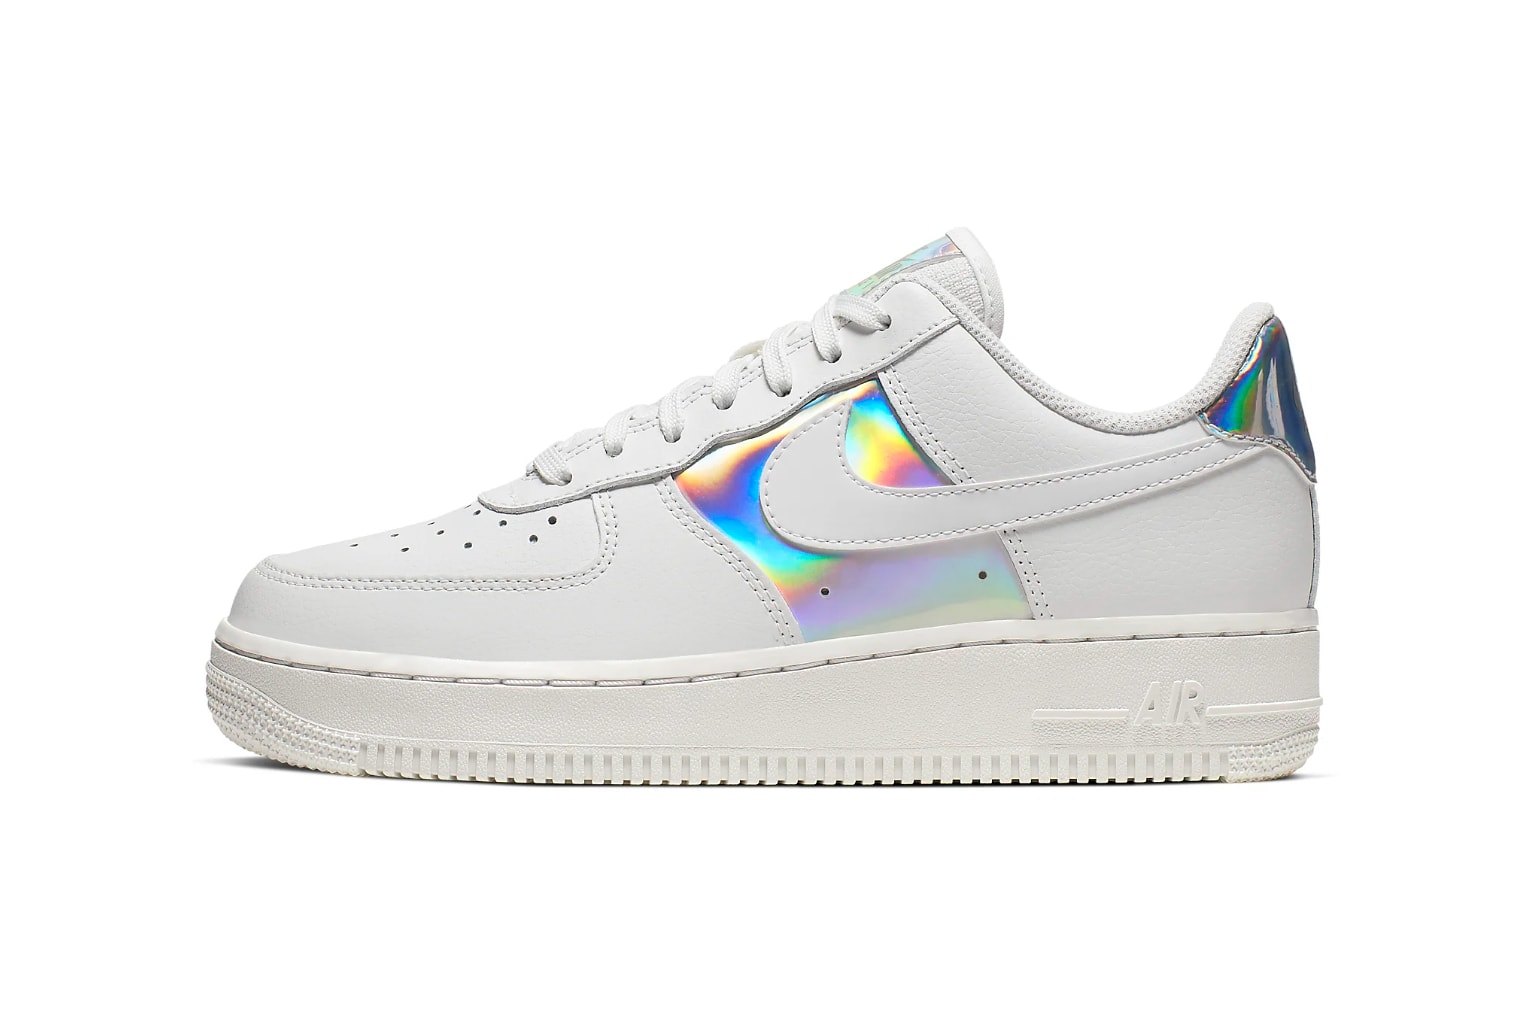 Nike's Air Force 1 '07 LV8, Black & Iridescent Silver